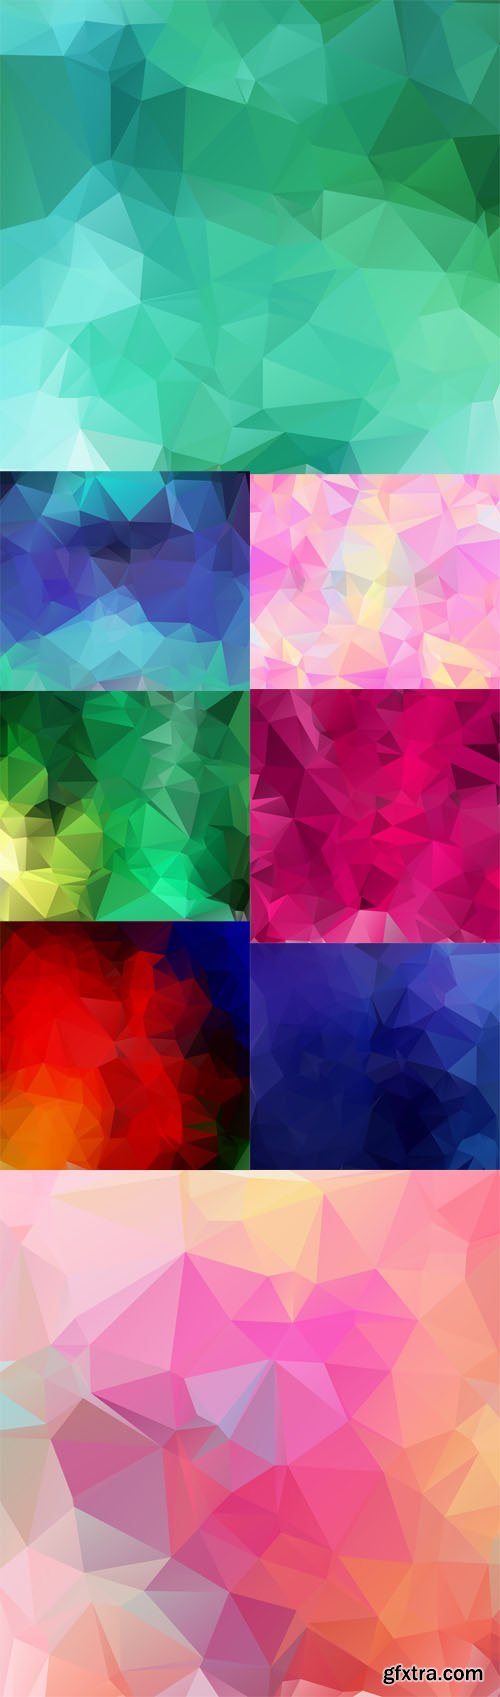 8 Triangles backgrounds, Geometric polygon pattern design